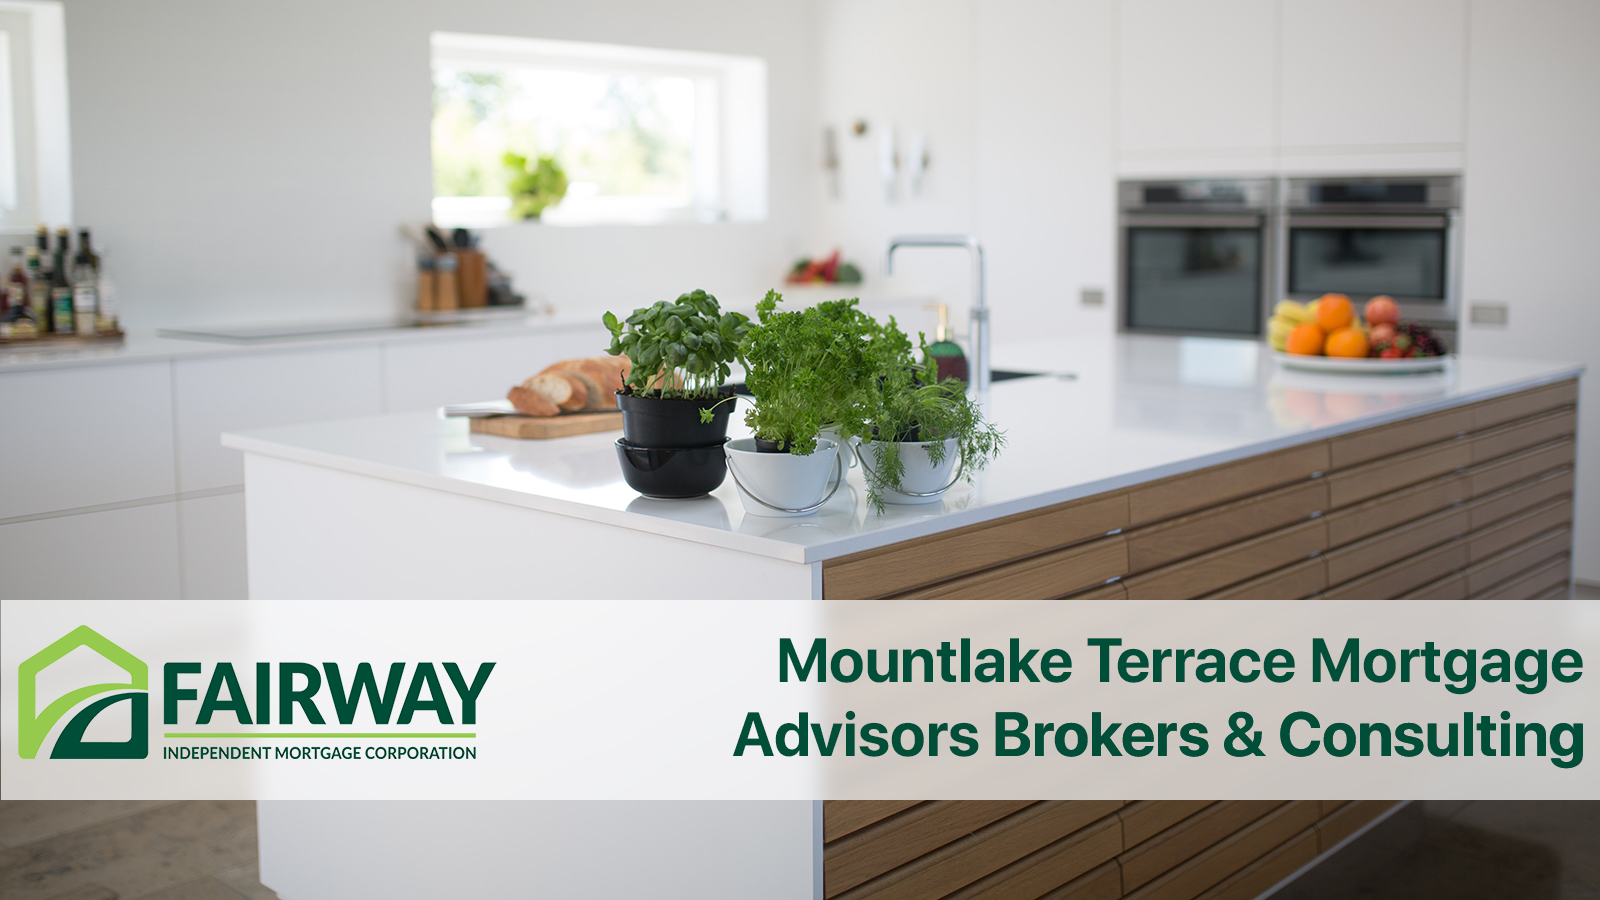 Mountlake Terrace Mortgage Advisors, Brokers and Consulting